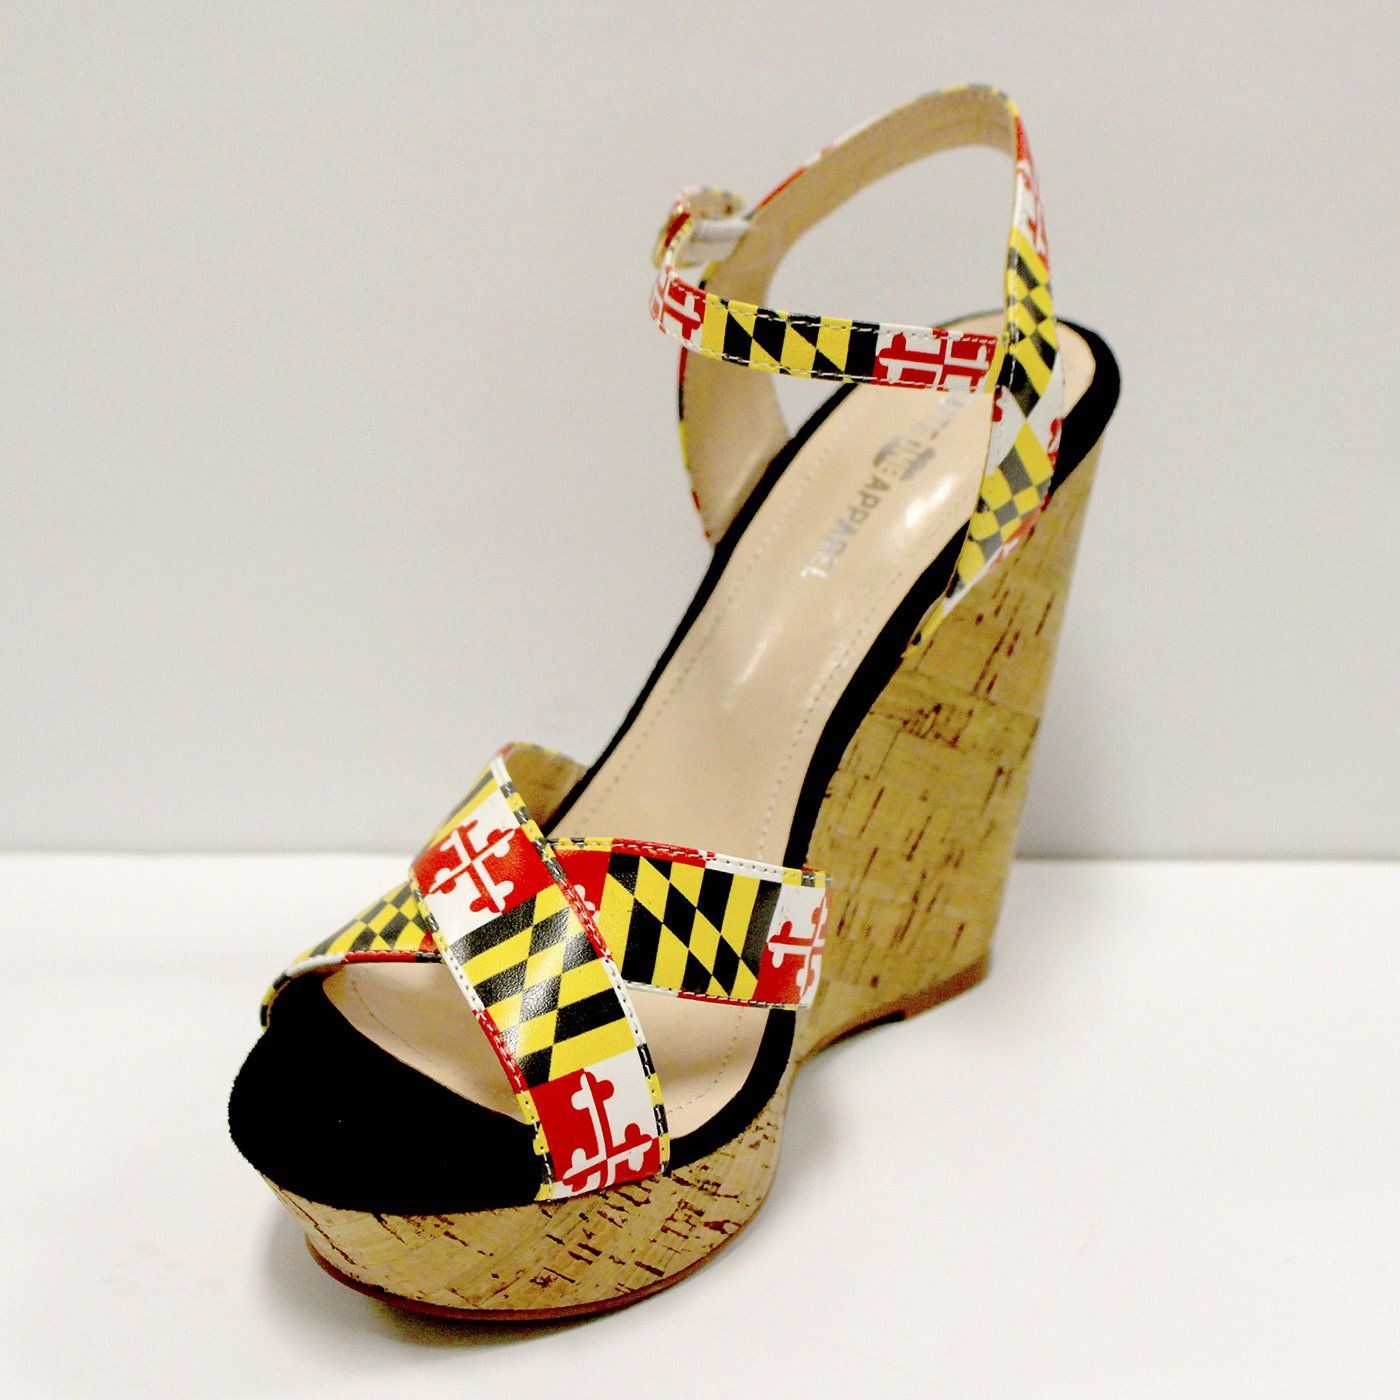 Maryland Flag / Cork Wedge Heels - Route One Apparel